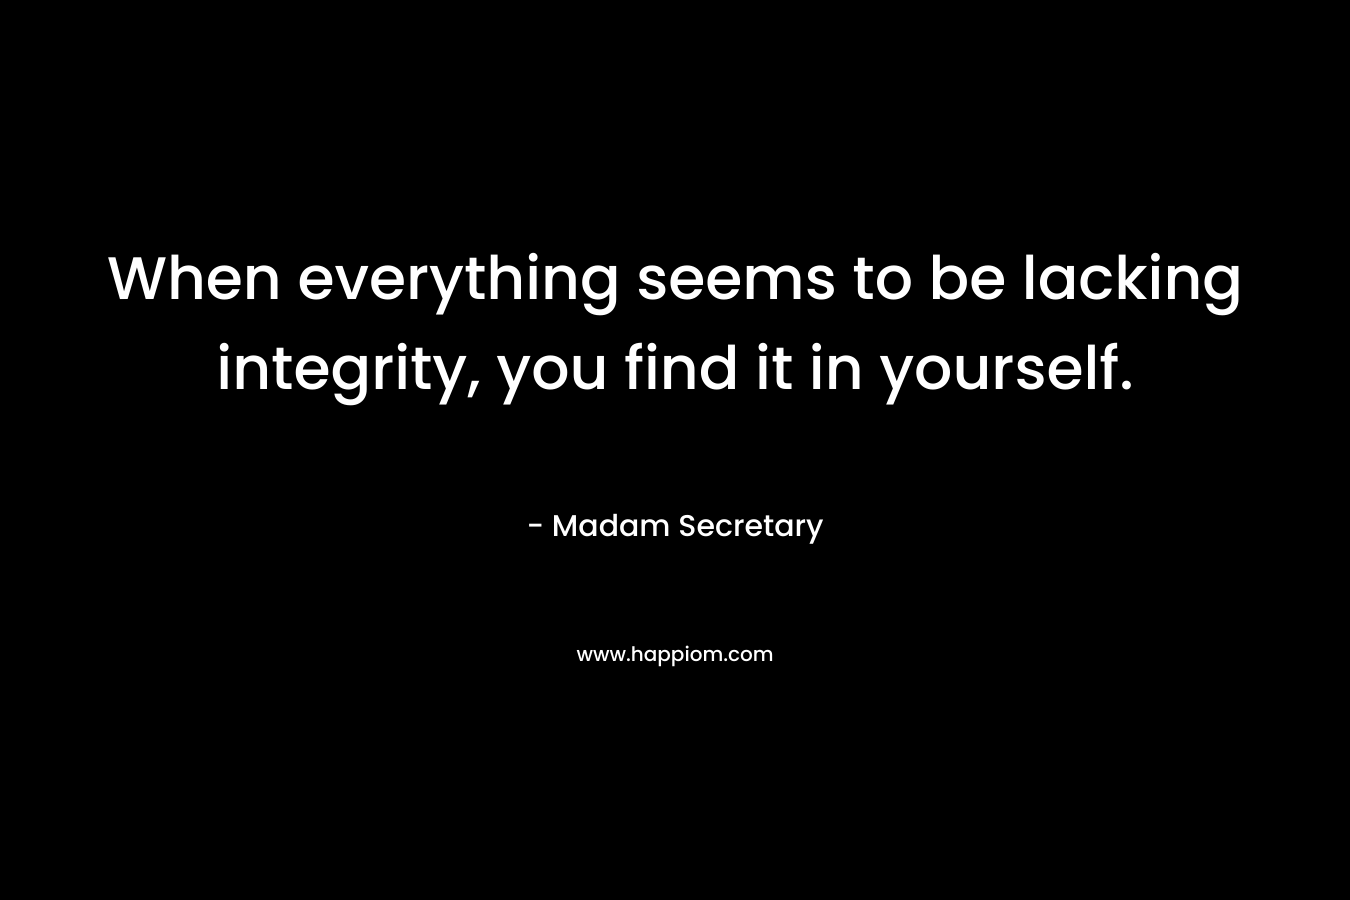 When everything seems to be lacking integrity, you find it in yourself. – Madam Secretary